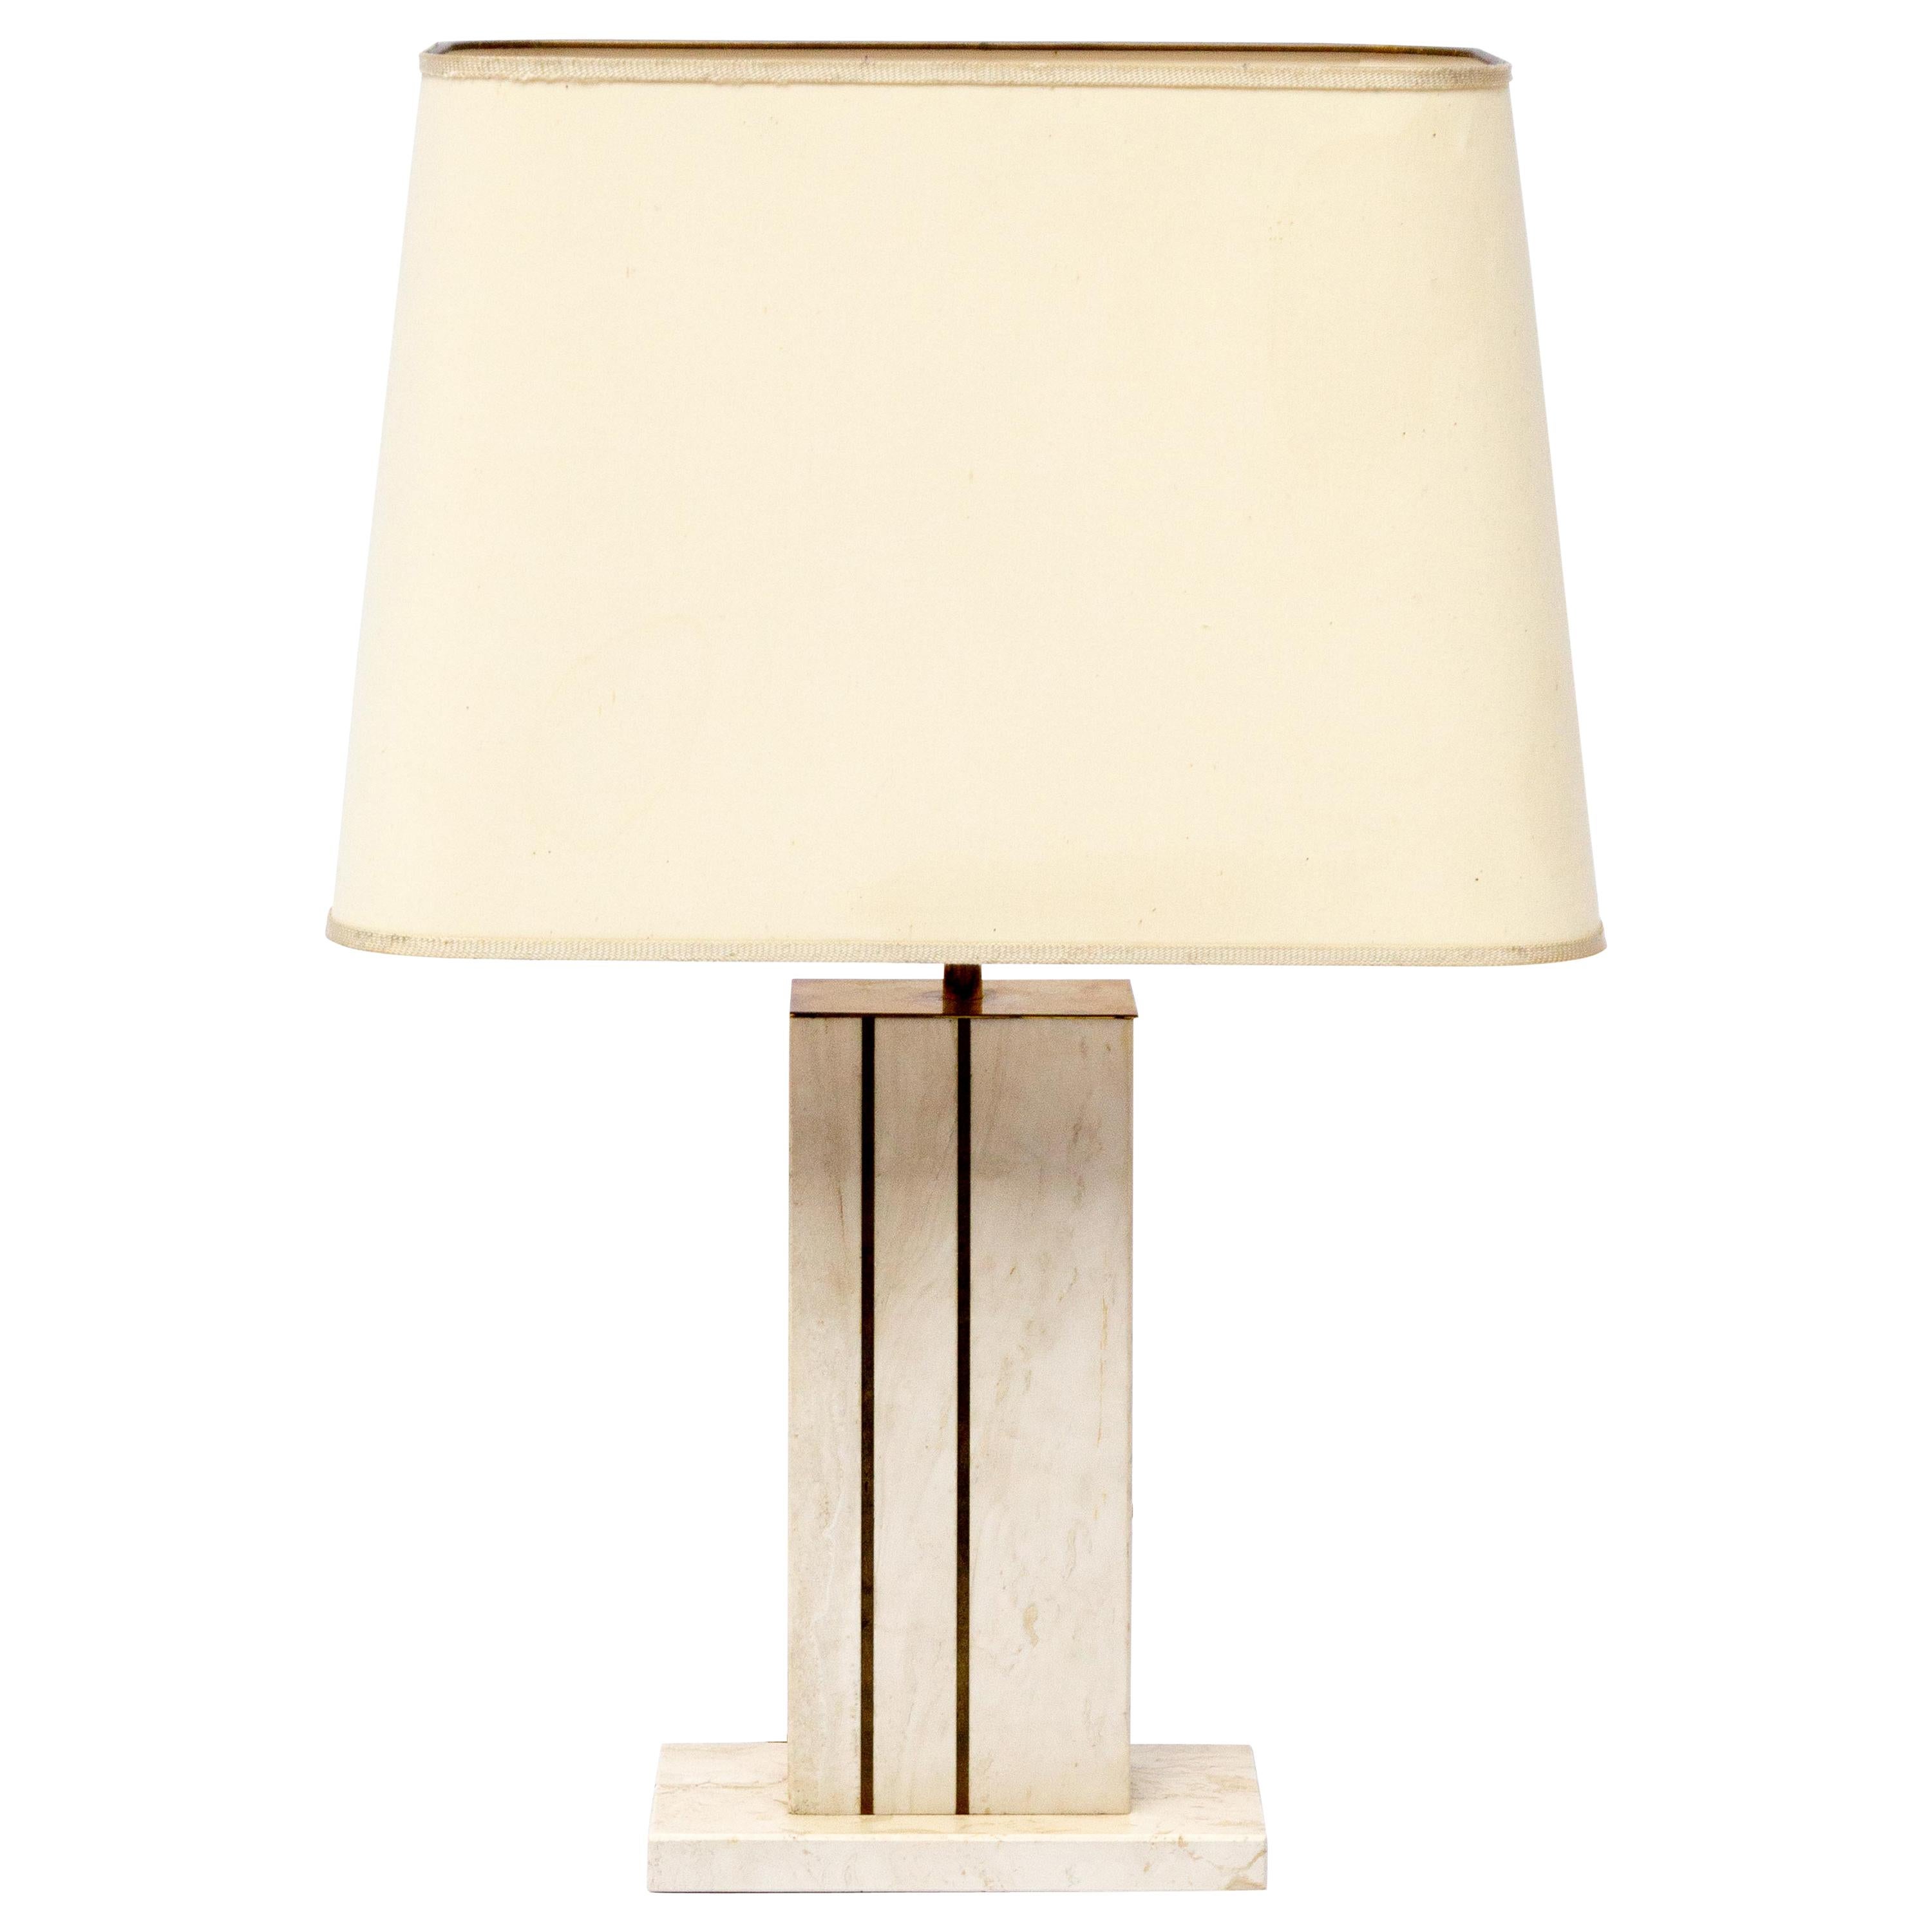 Traverine Table Lamp by Camille Breesch, Belgium, 1970s